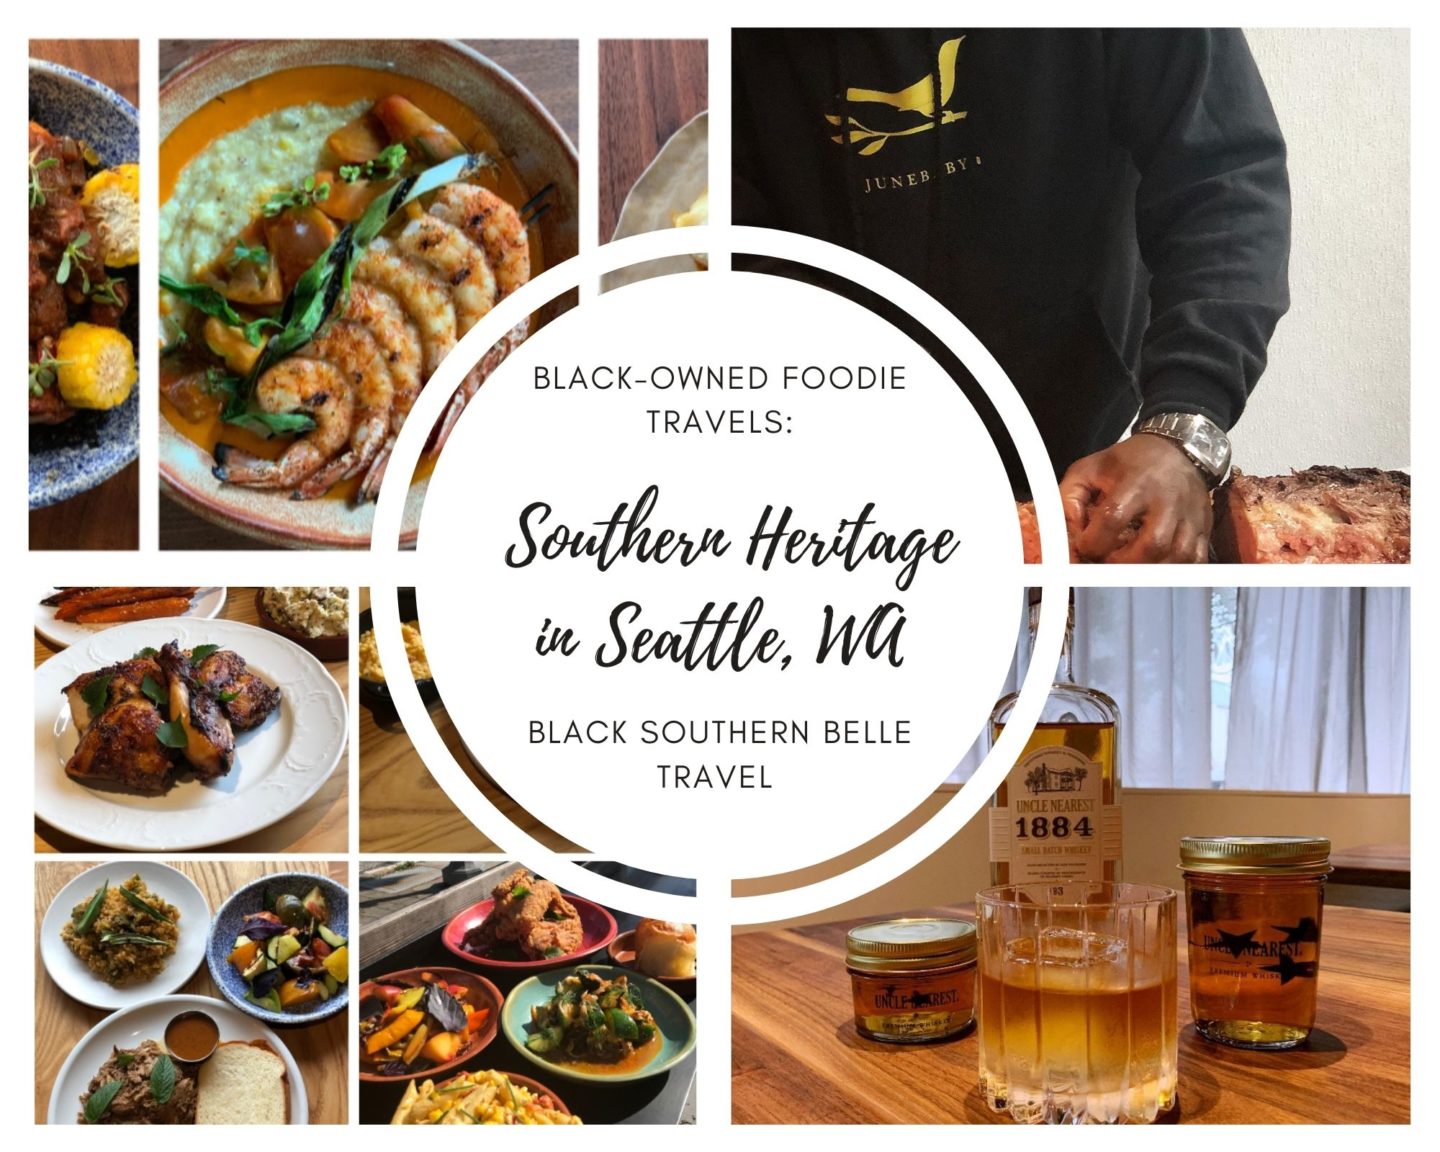 Black-Owned Foodie Travels: Southern Heritage in Seattle, WA